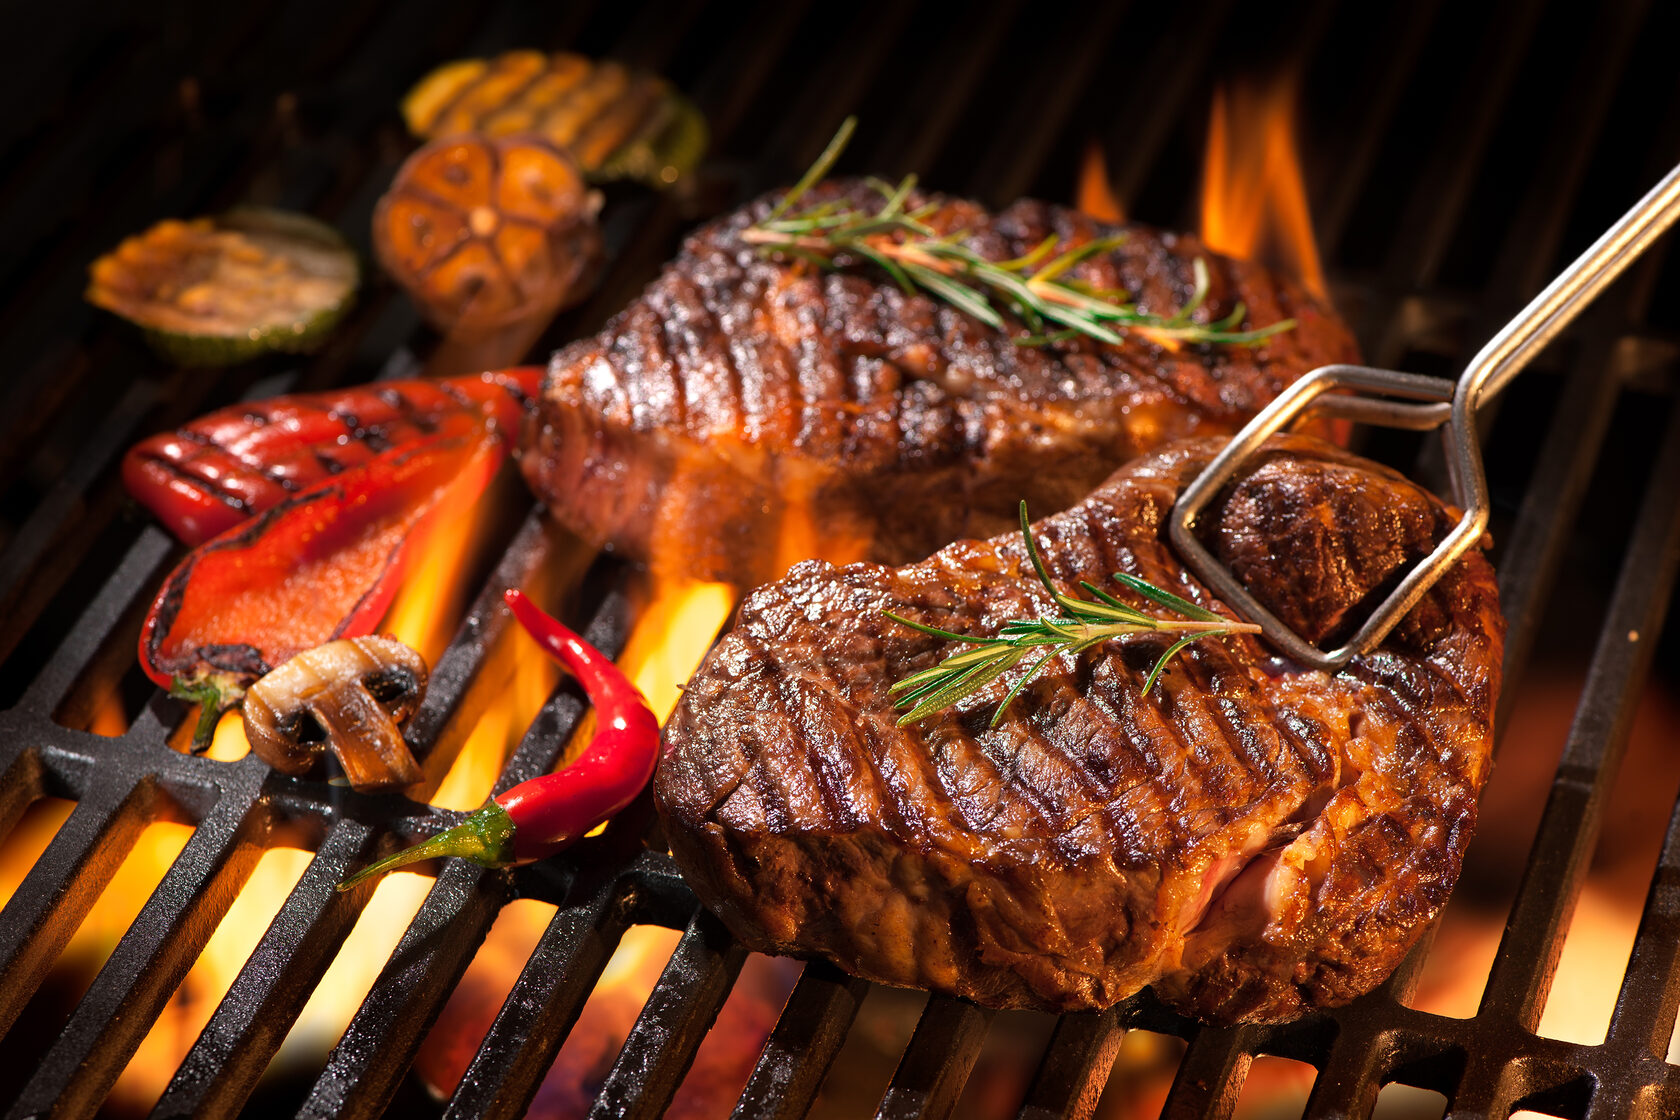 What meat is best for barbecue?